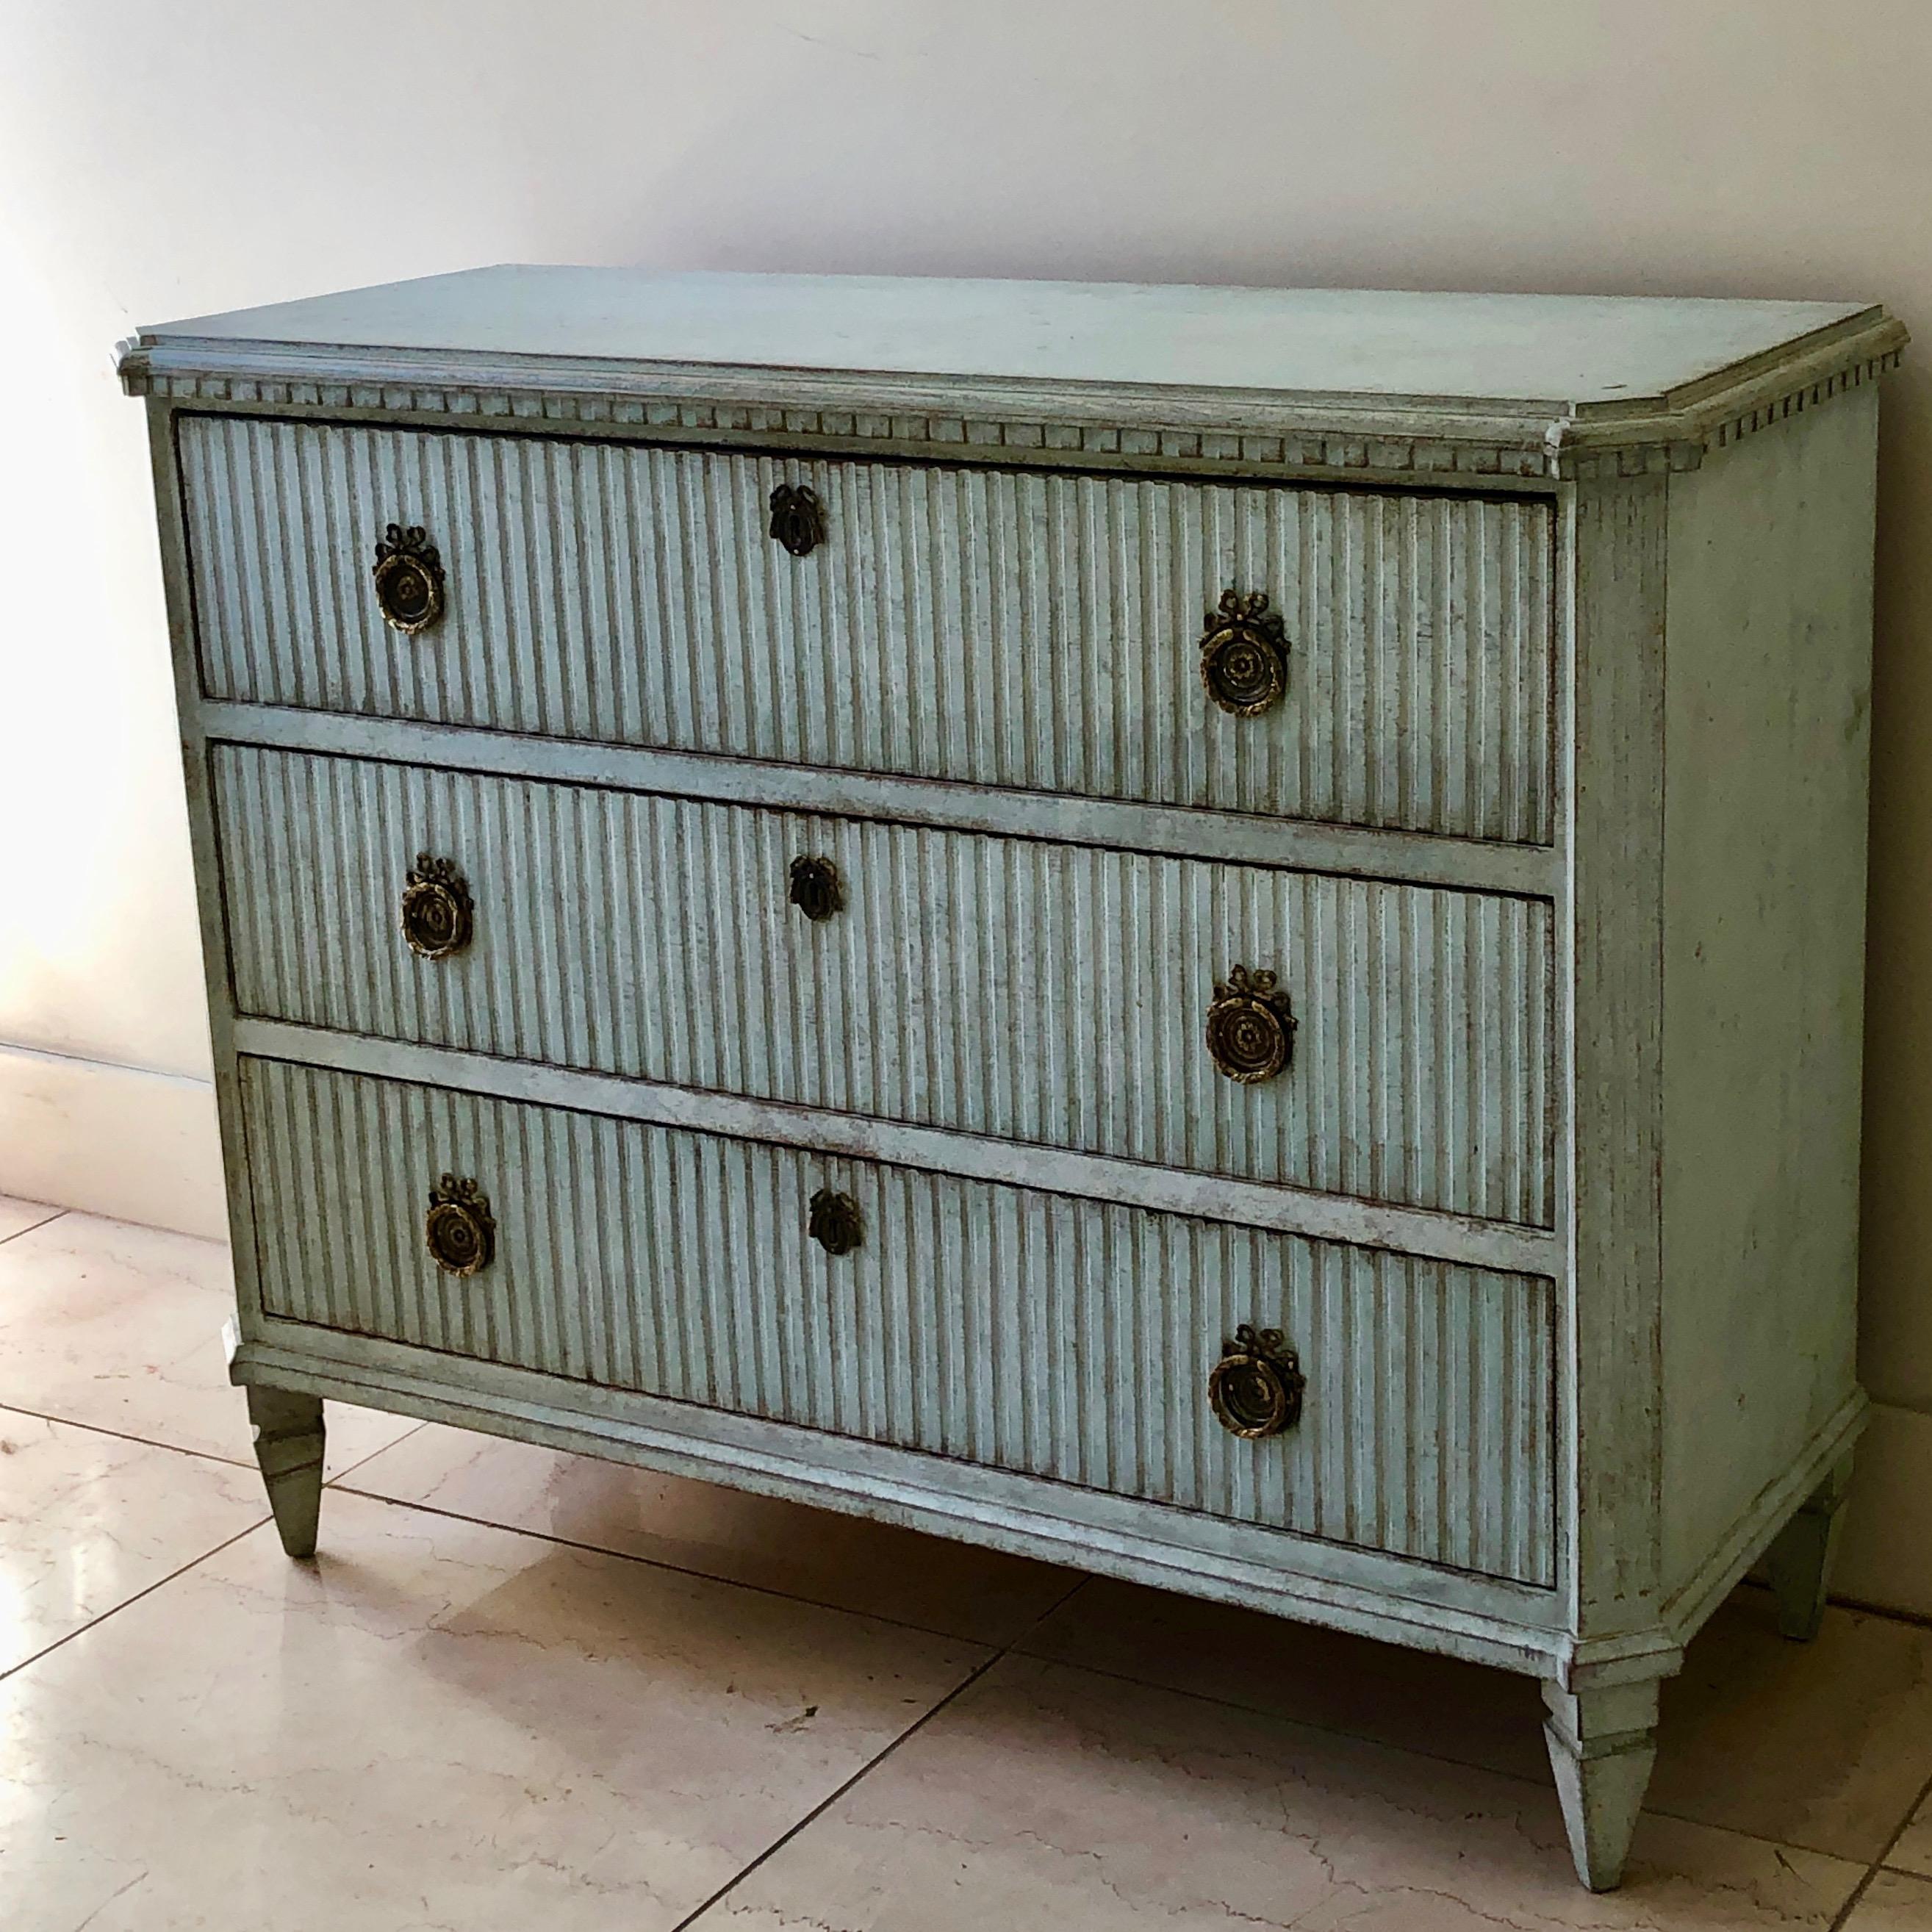 Early 19th century period Swedish Gustavian chest of drawers with Classic reeded drawer fronts with handsome hardwares and dentil molding in palest blue color under the shaped top, Sweden, circa 1820. 
Surprising pieces and objects, authentic,